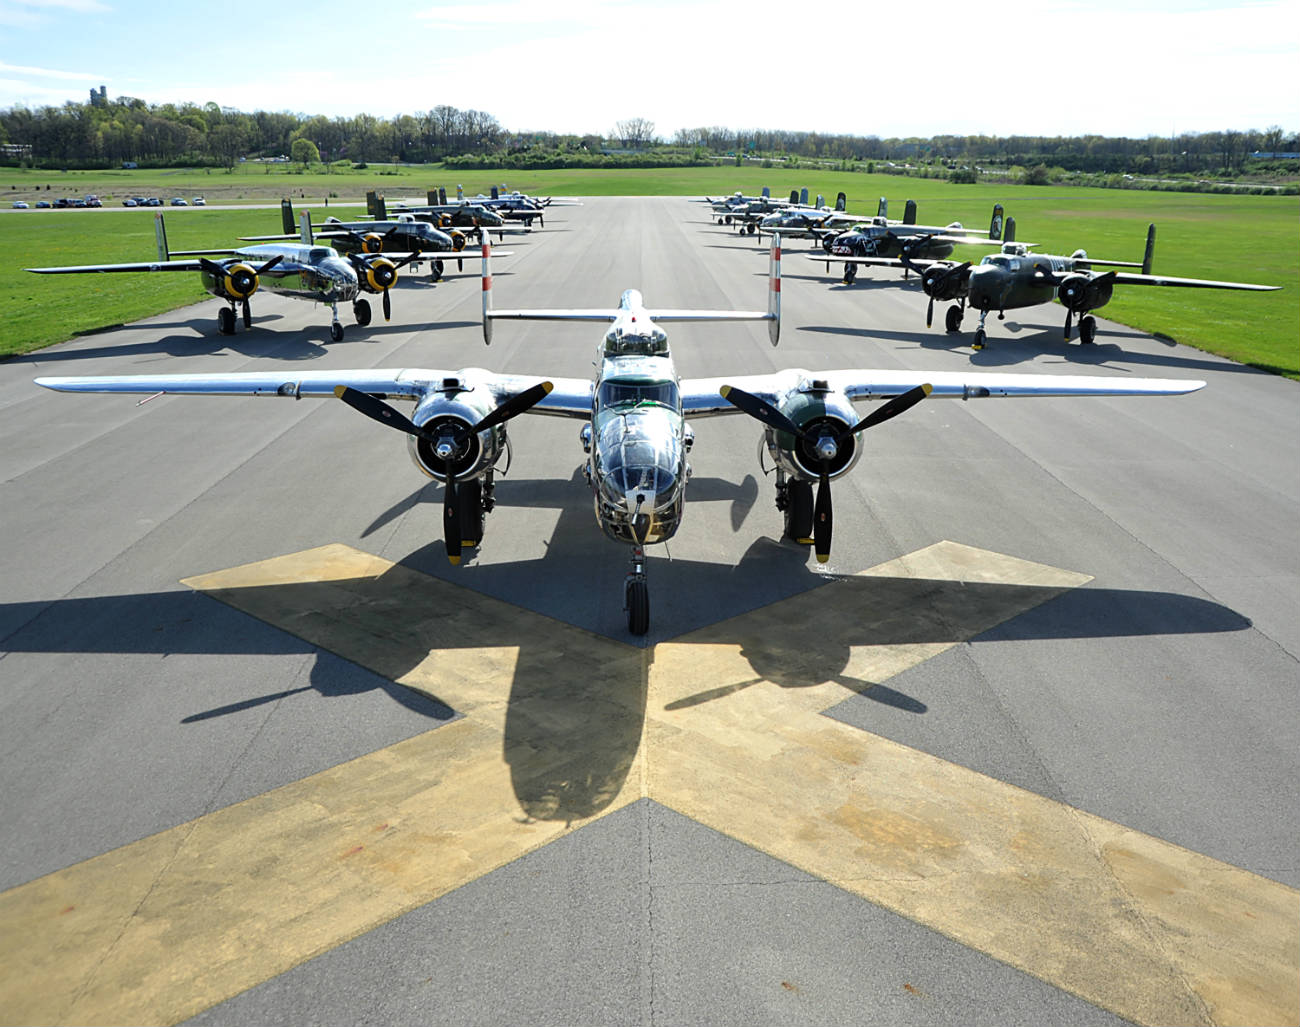 B-25 Mitchell bombers sit parked on the runway